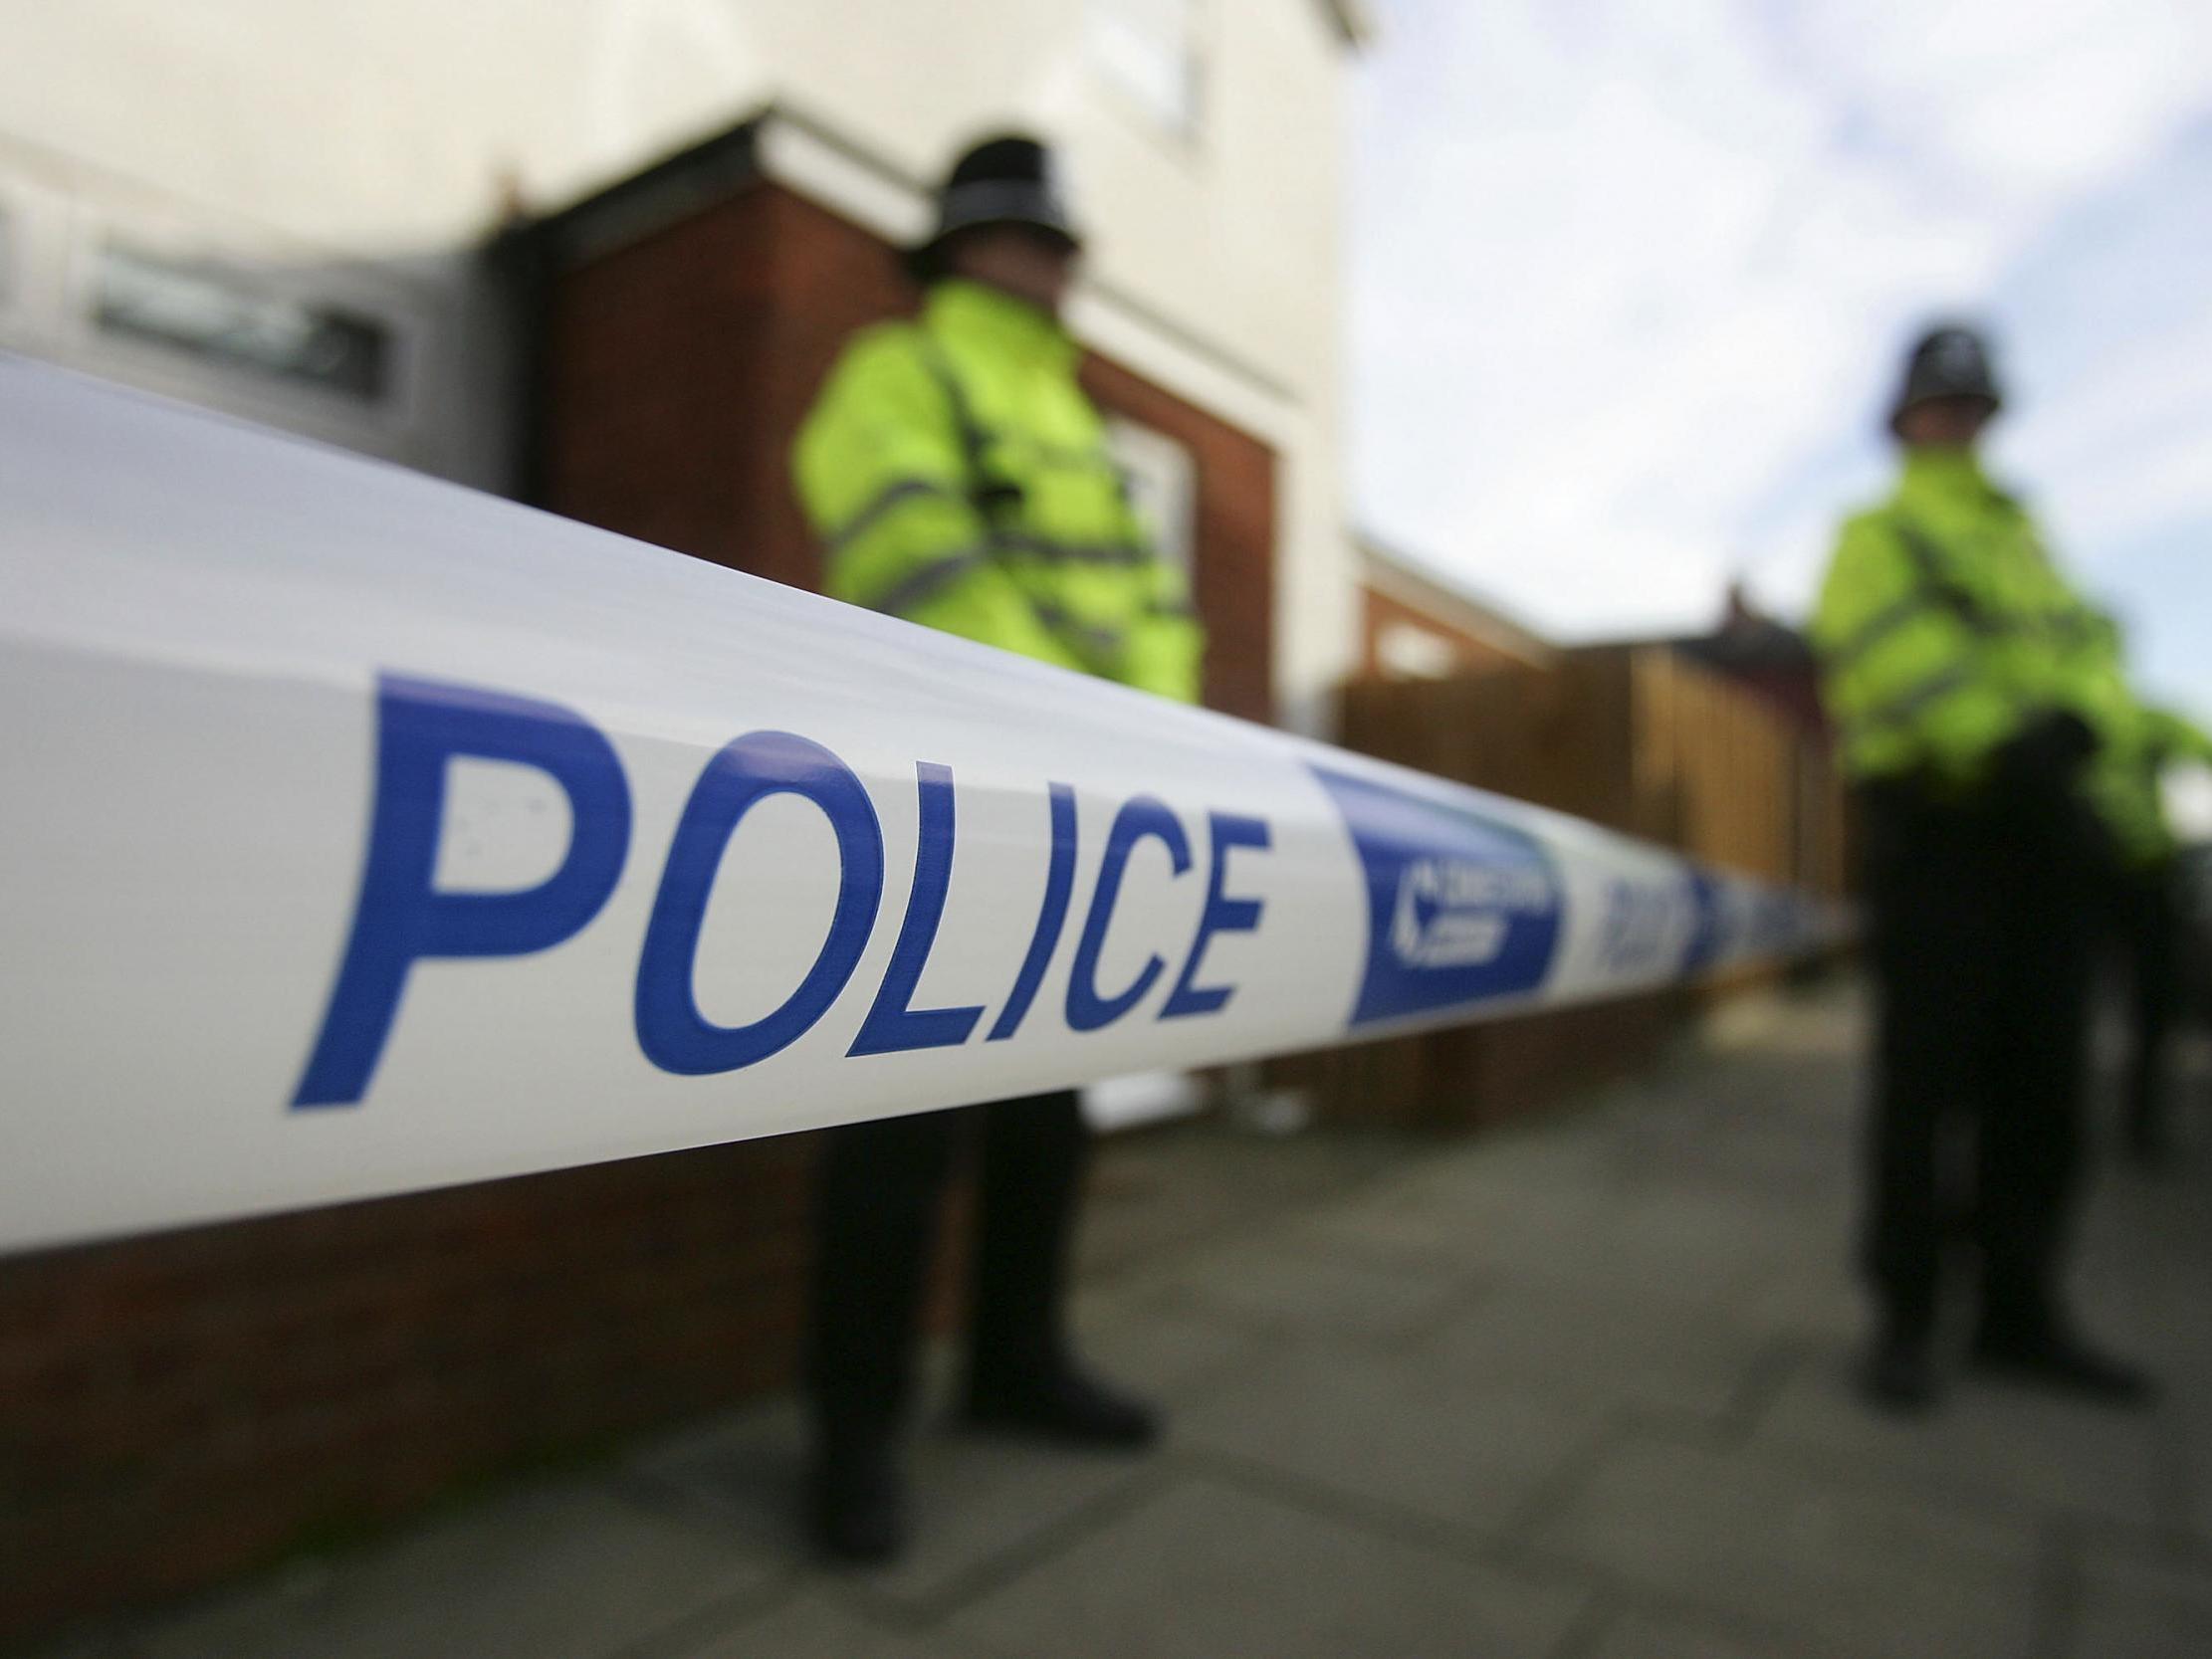 Police officer stabbed while attending call on Easter Sunday | The ...